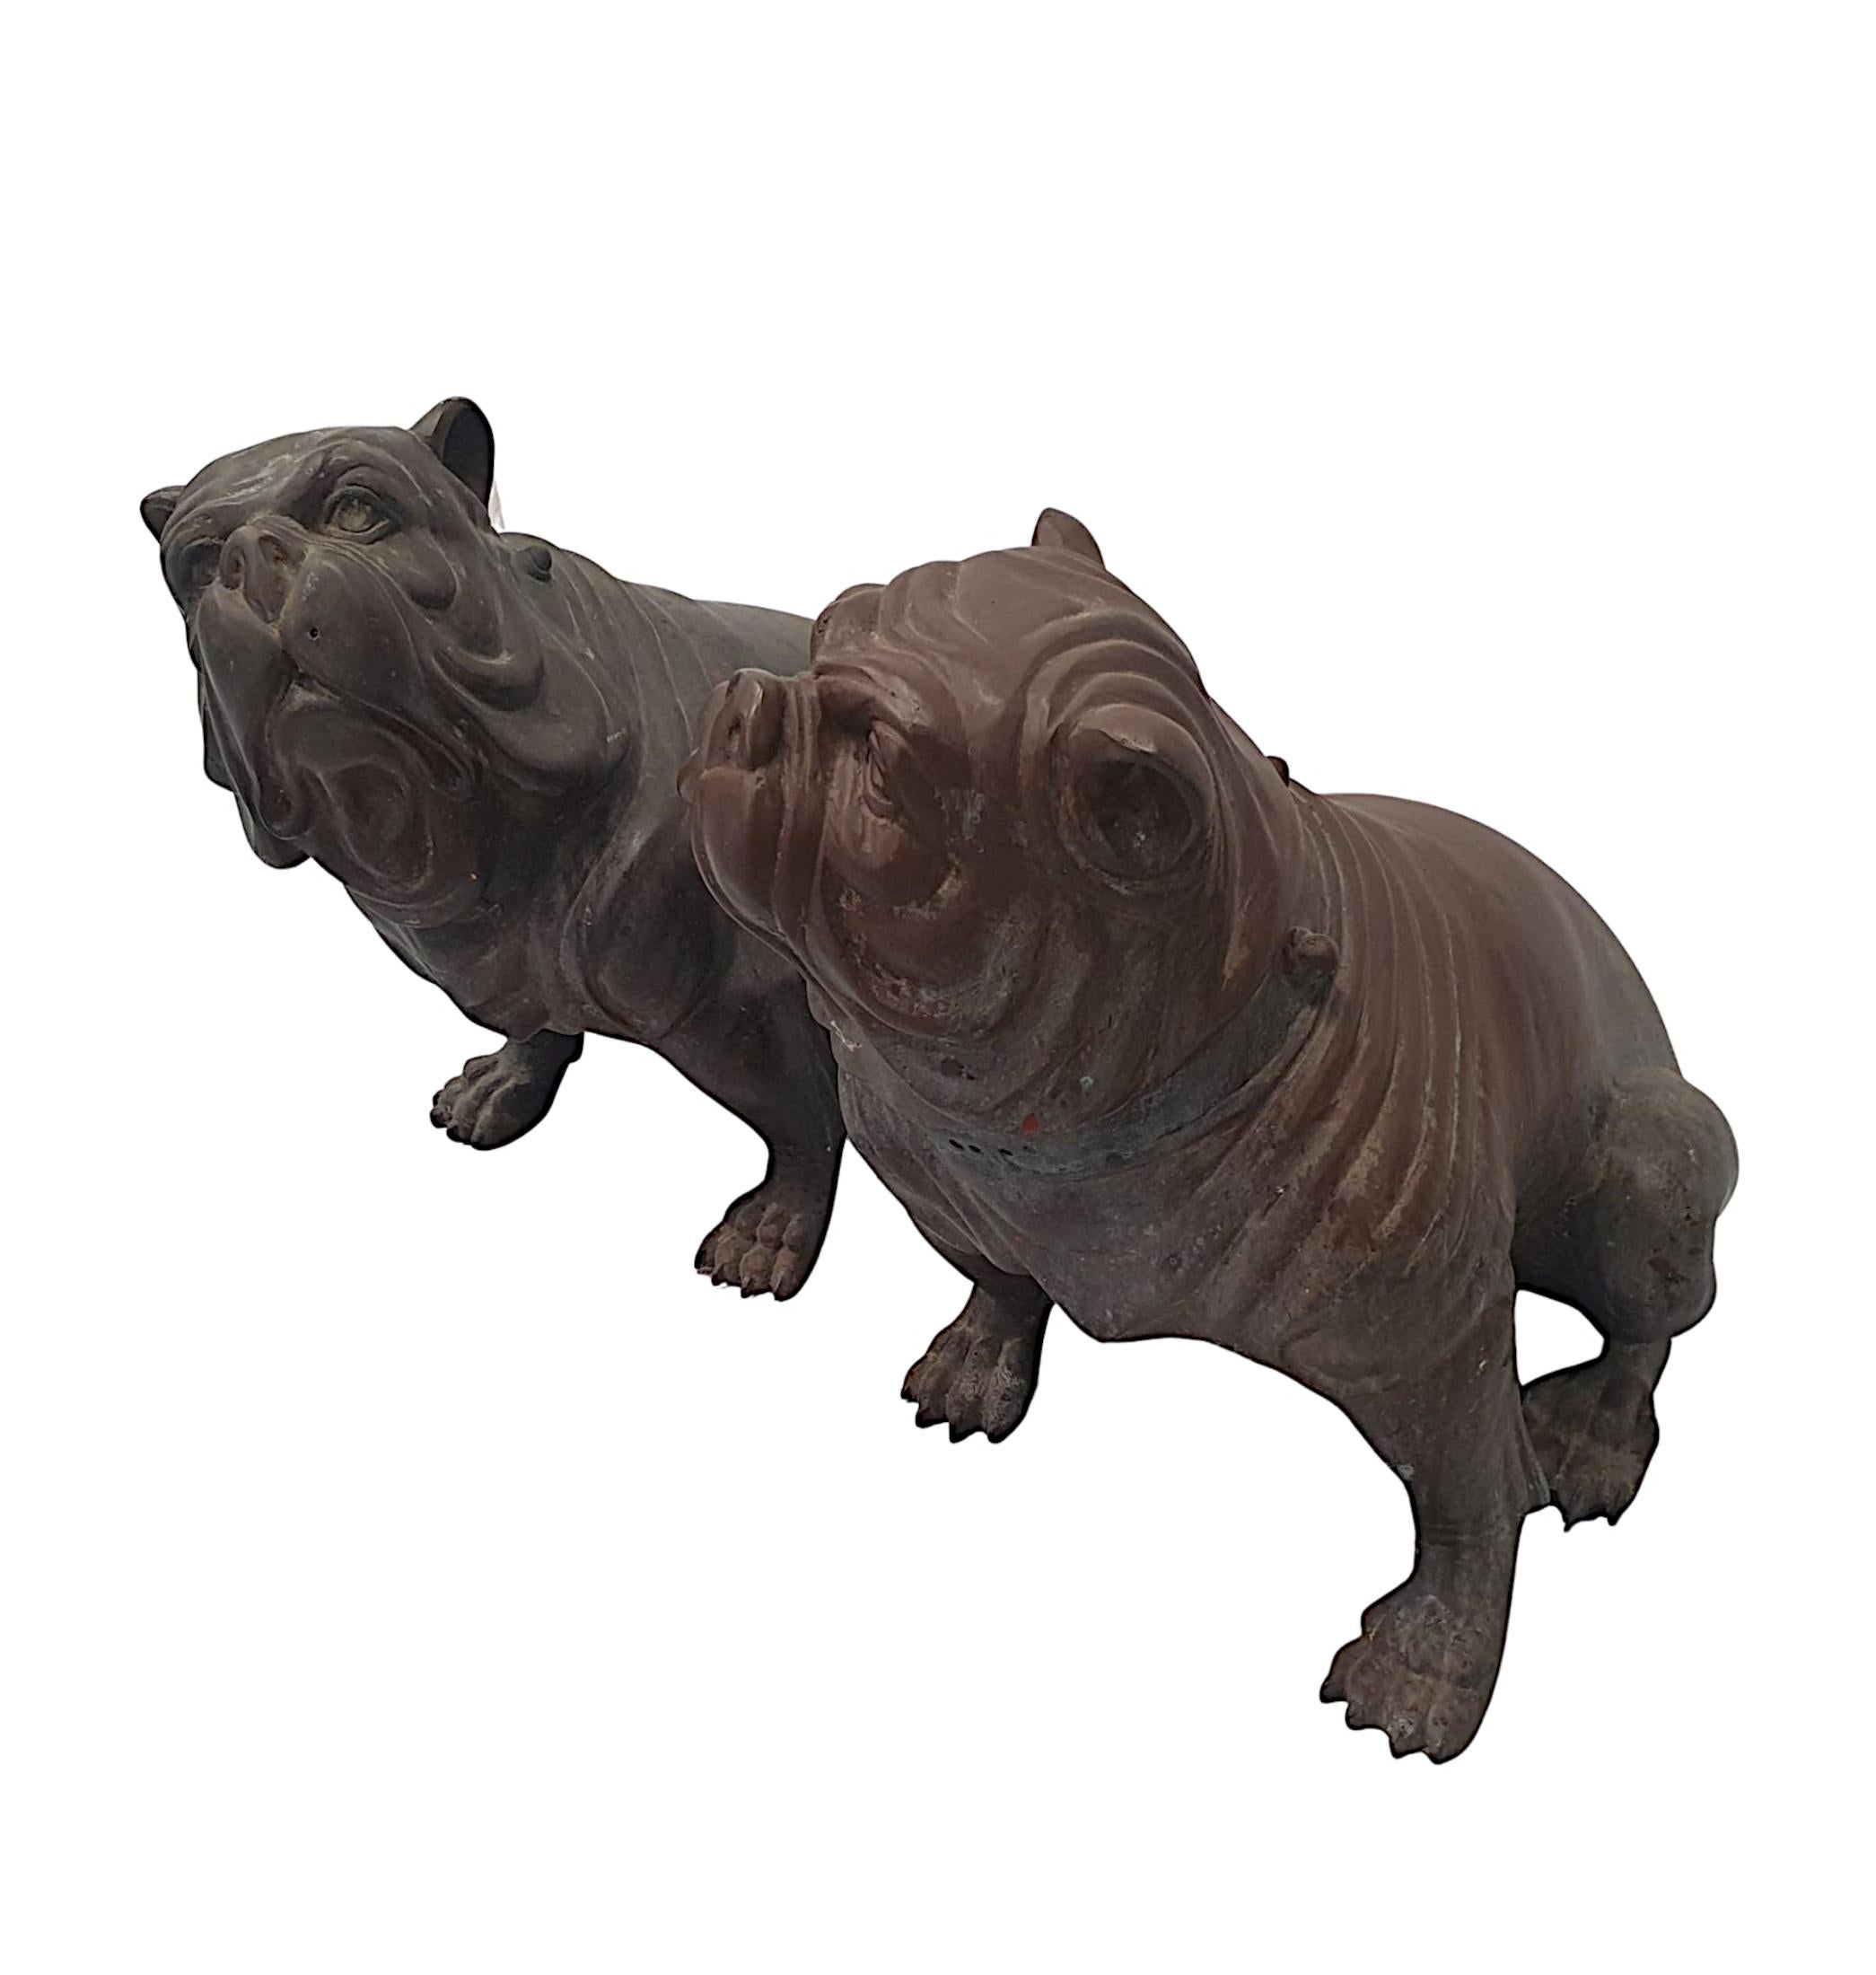 A very rare early 20th Century original pair of animalier bronze sculptures depicting a pair of bull dogs, finely cast with stunning detail and patination. The pair would be a ideal addition to a garden setting and both have some paint dabs applied